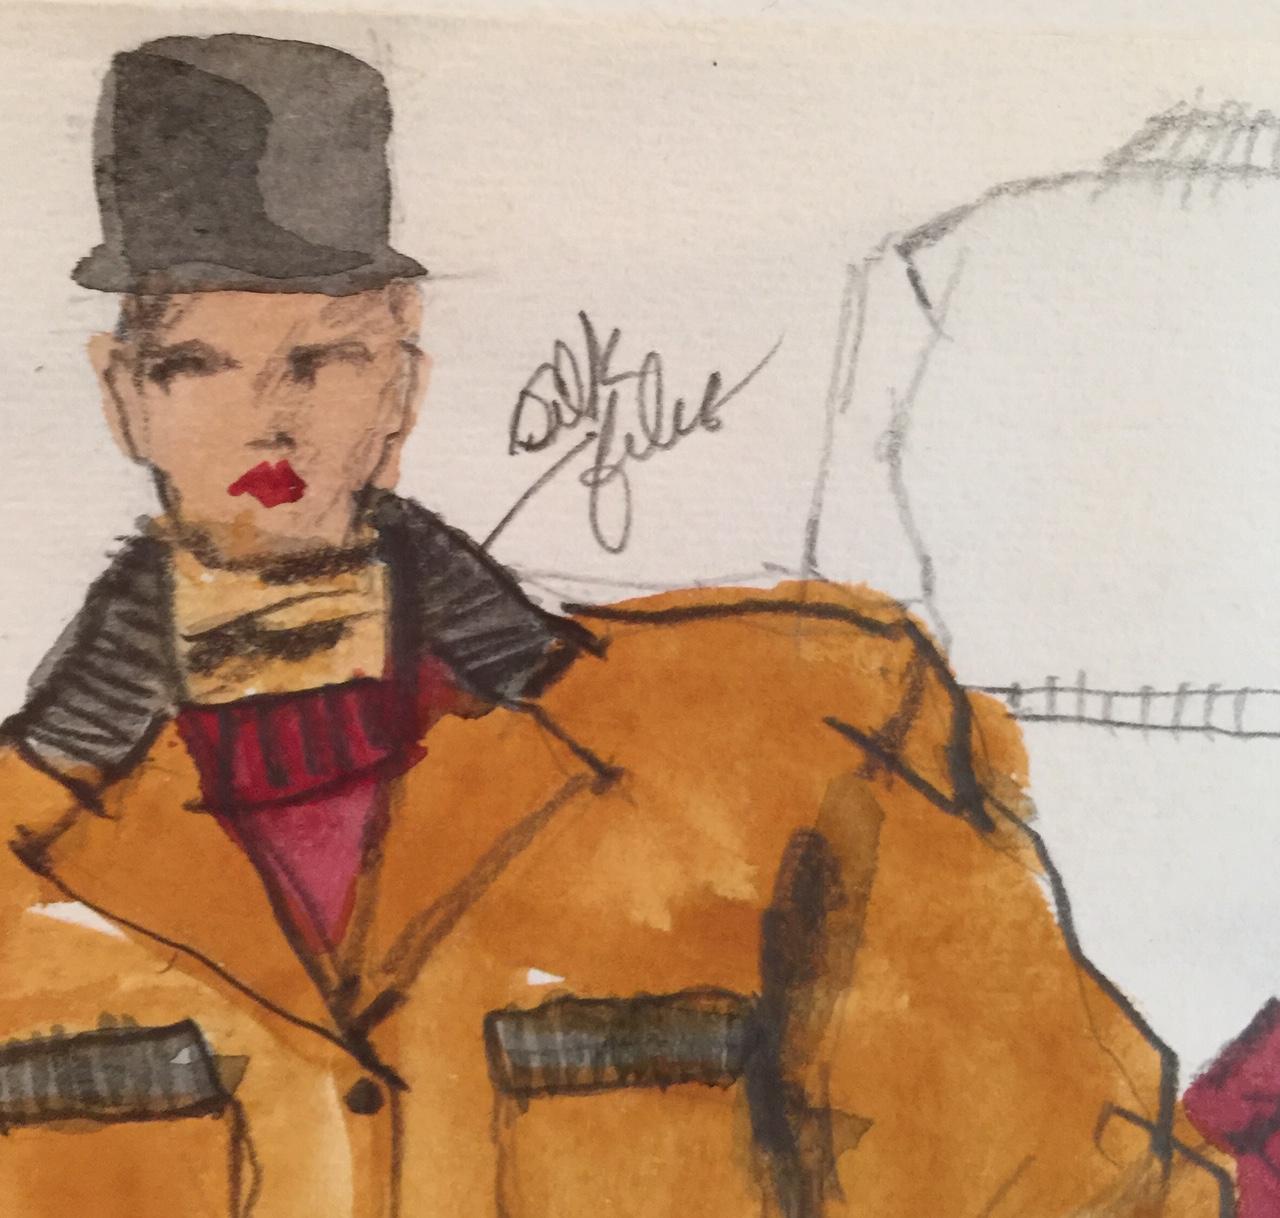 Rare Original Fashion Sketch With Production Notes - Painting by Gordon Henderson